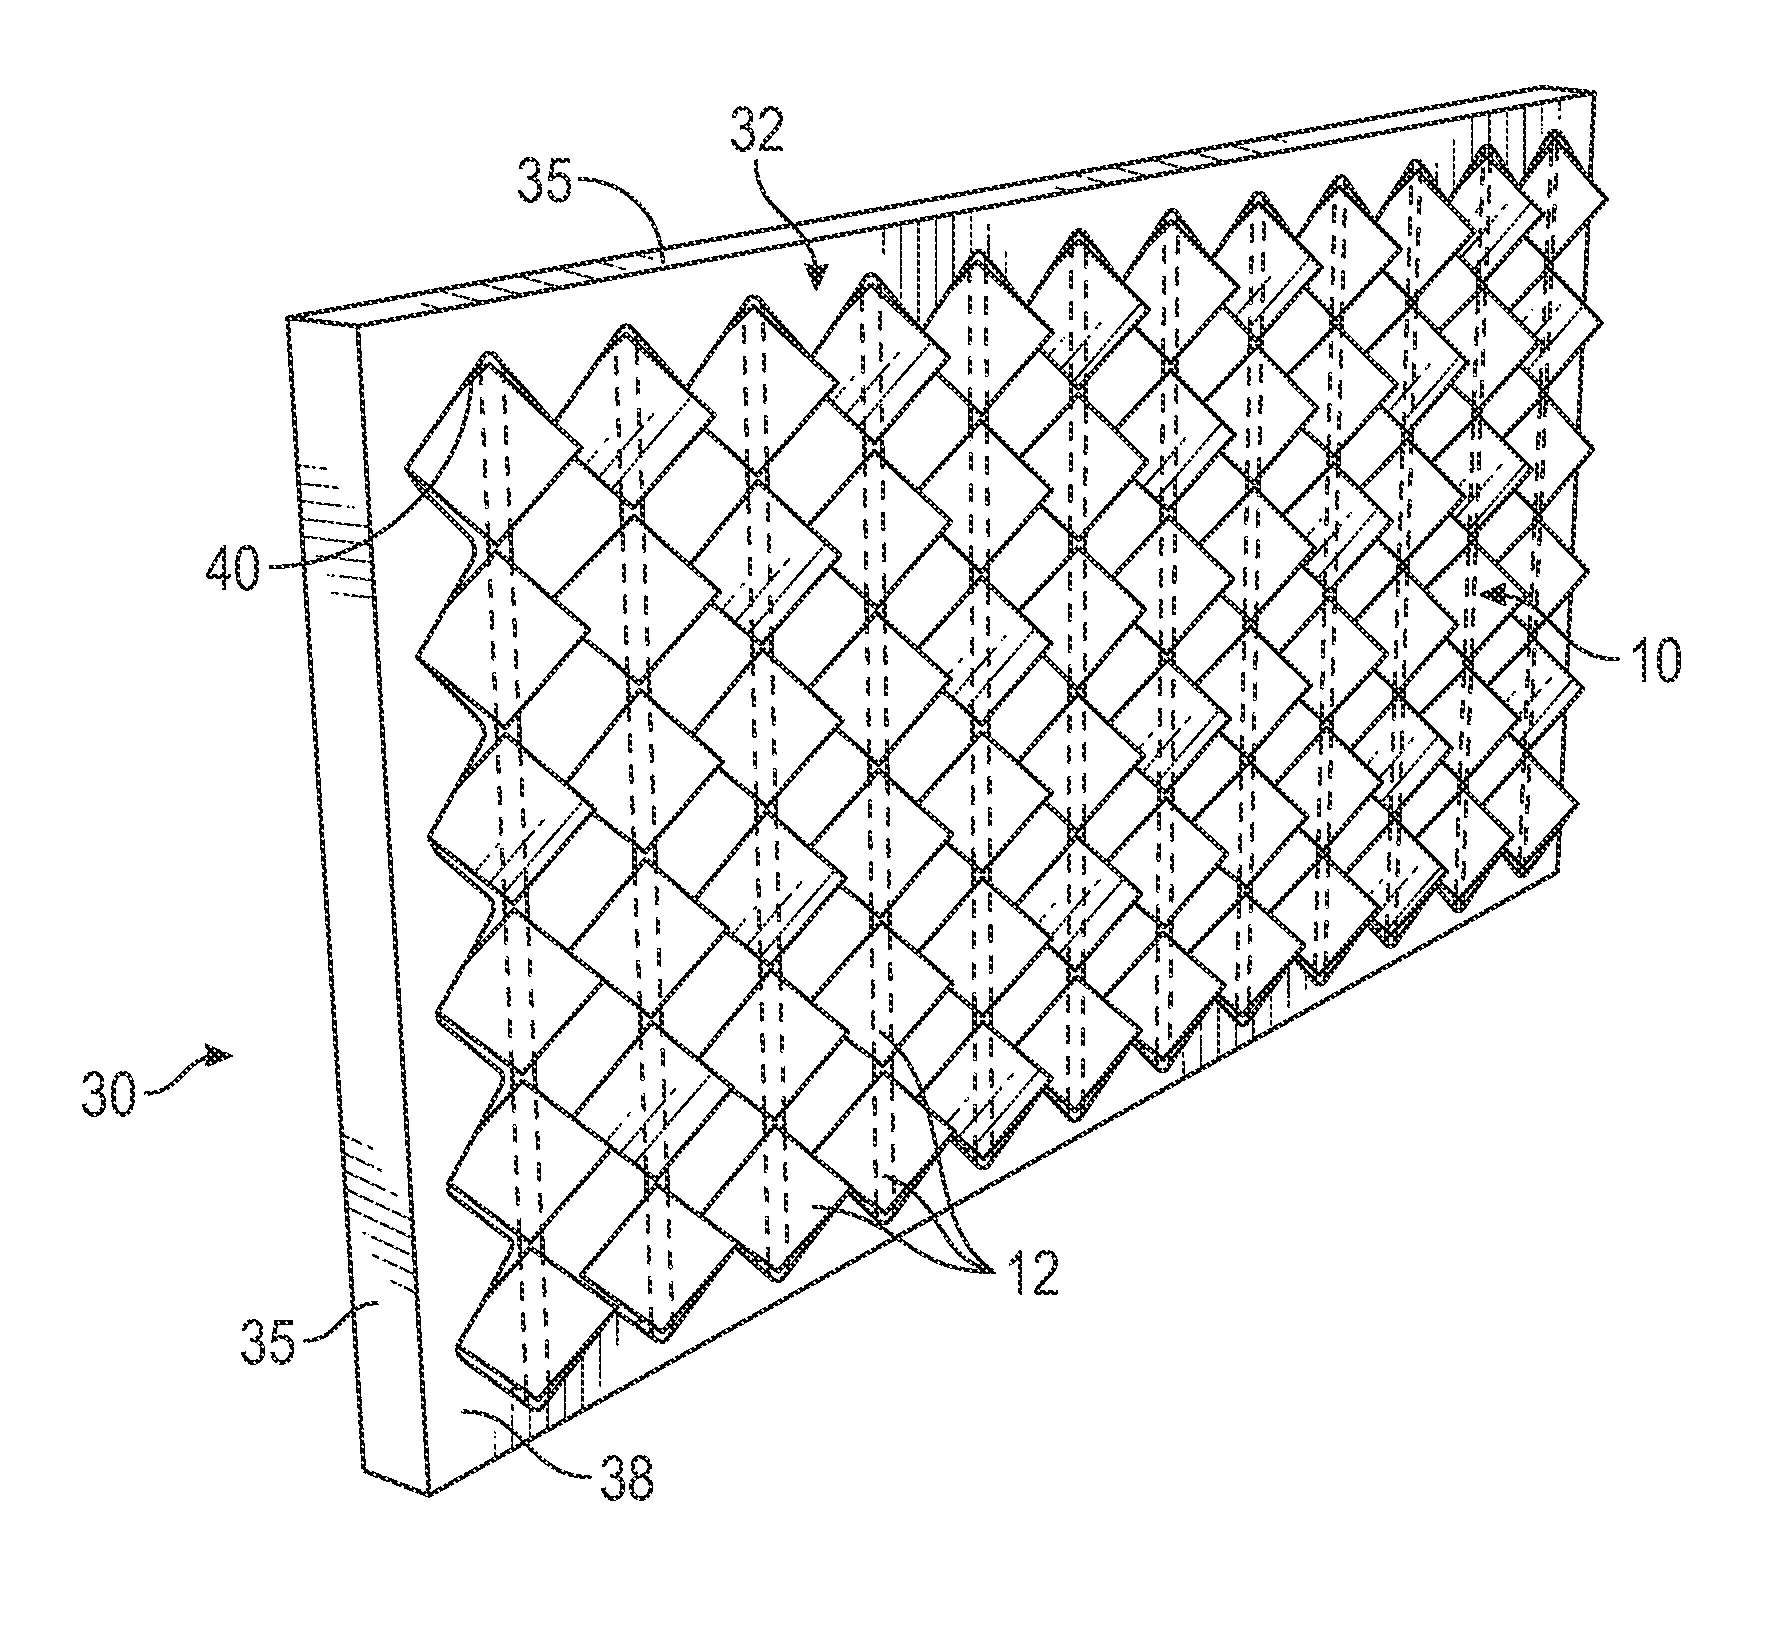 Dynamically adjustable acoustic panel device, system and method